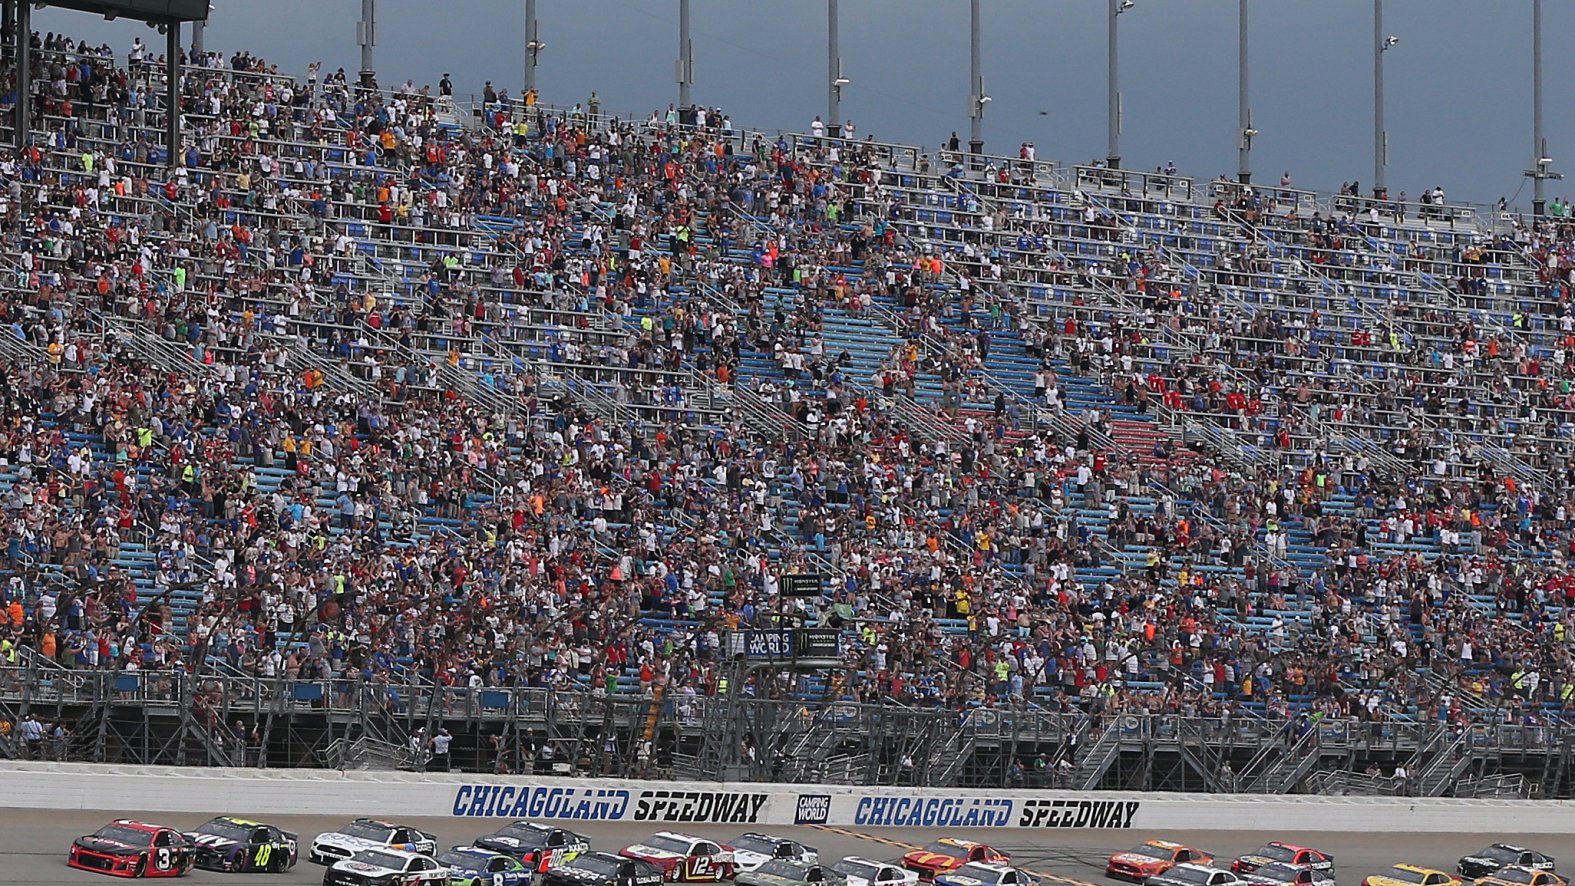 Chicagoland Motor Speedway Absent From NASCAR Schedule for 2021 Season